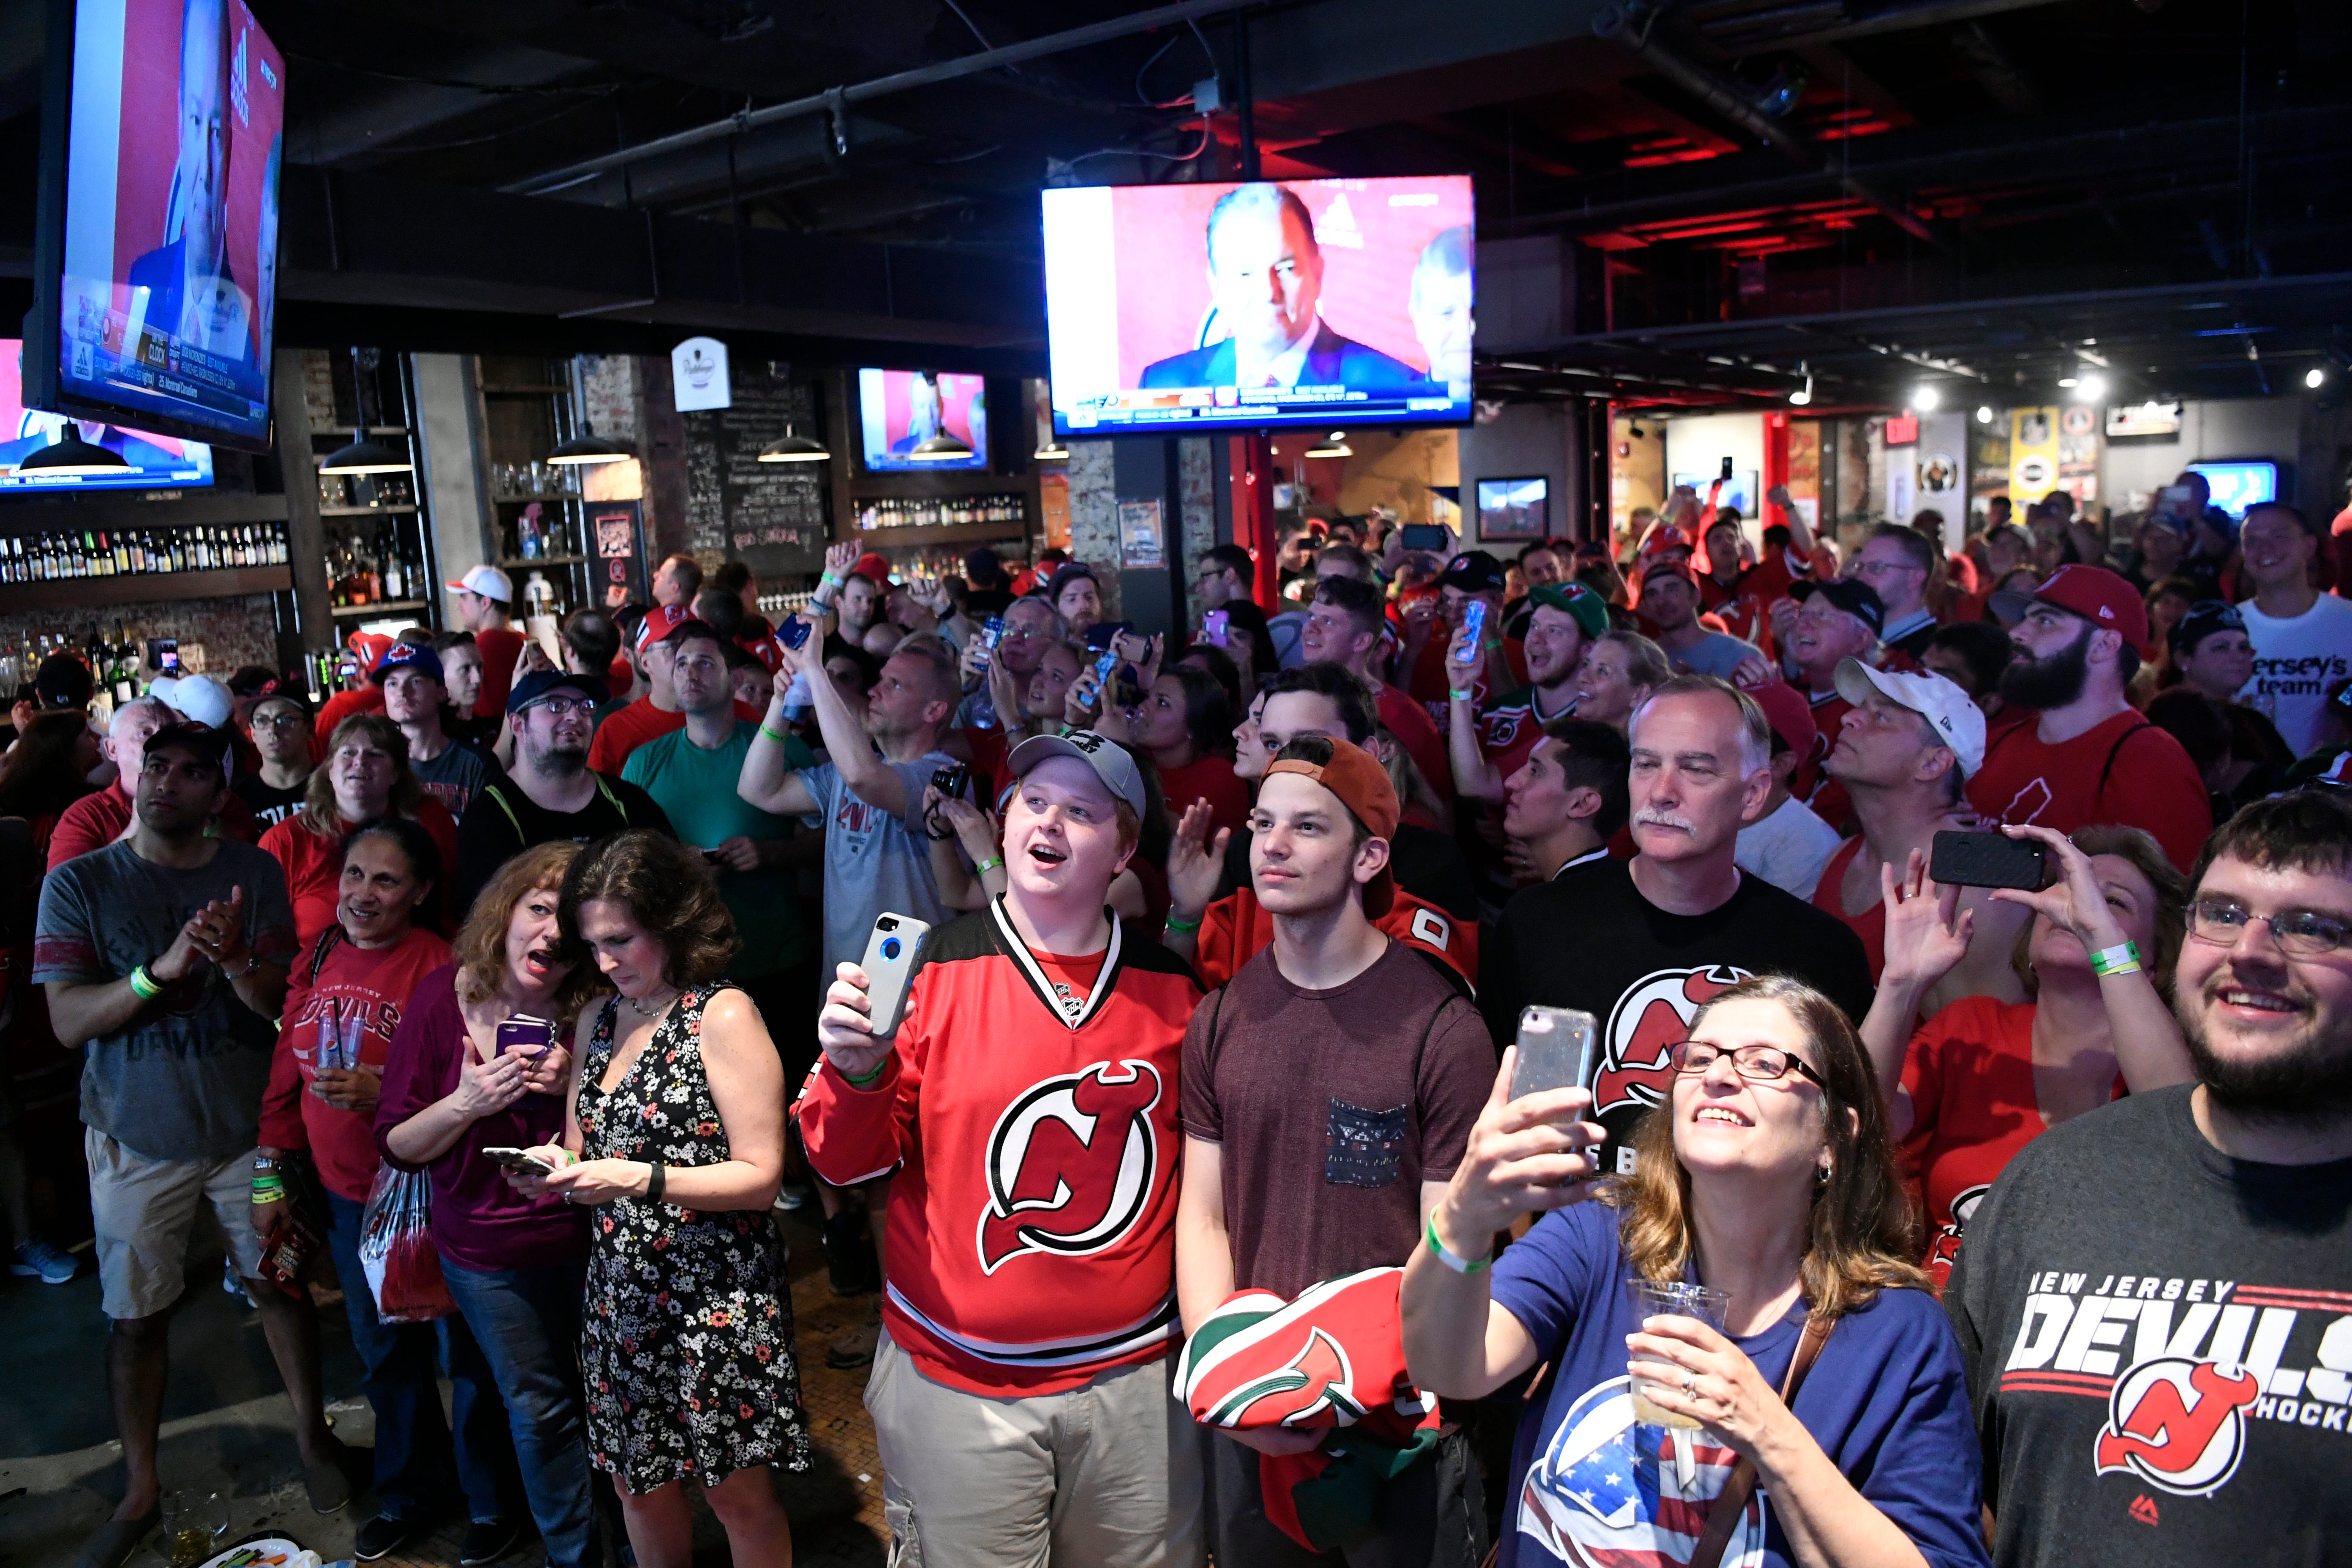 new jersey devils draft party